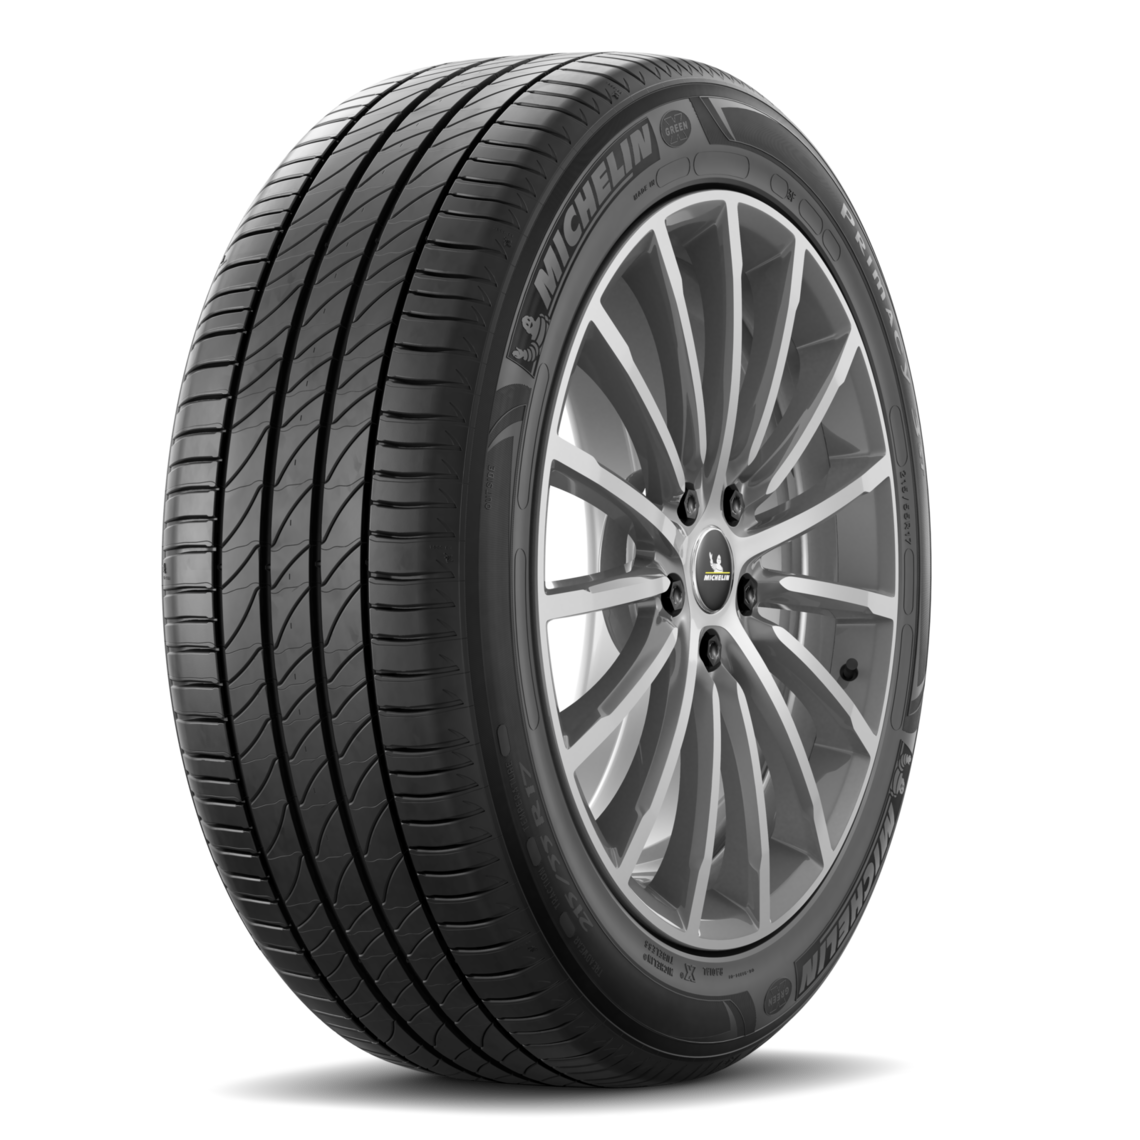 MICHELIN PRIMACY 3 ST - Car Tyre | MICHELIN Middle-East Official 